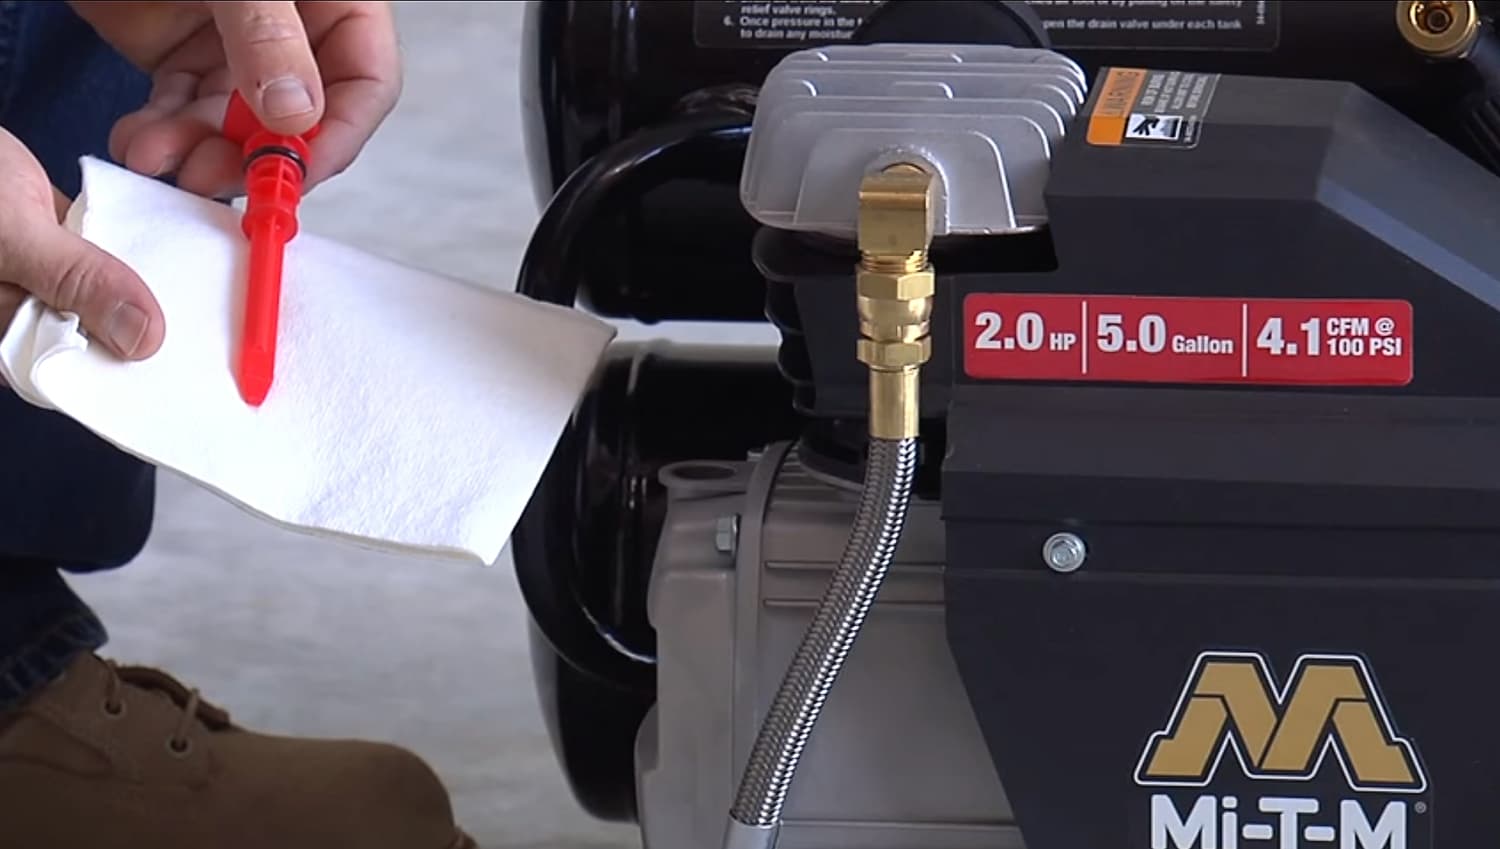 Make sure the air compressor is on a flat surface, and check the pump oil level before each use.